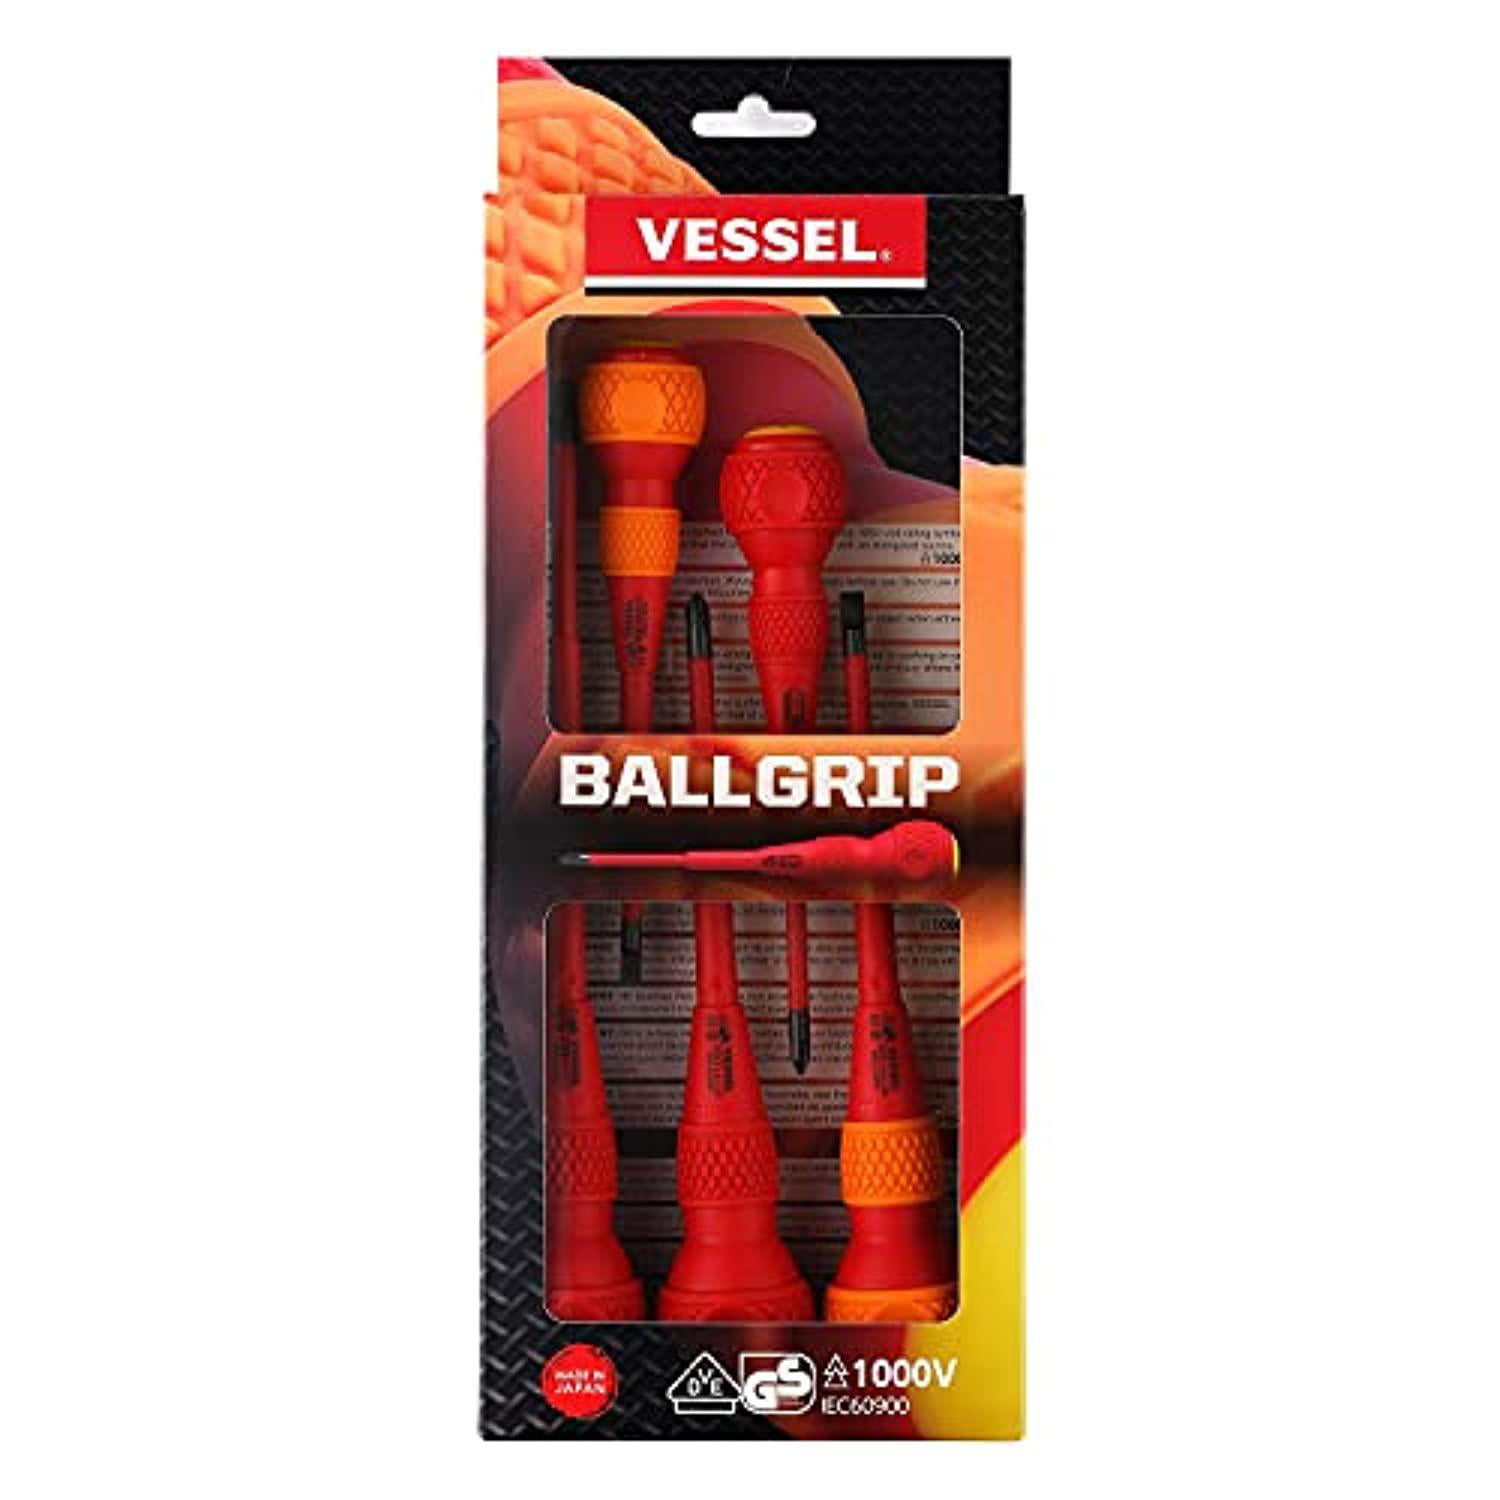 Made in JAPAN Set of 4 VESSEL Insulated Ball Grip Screwdriver No.225 Series 